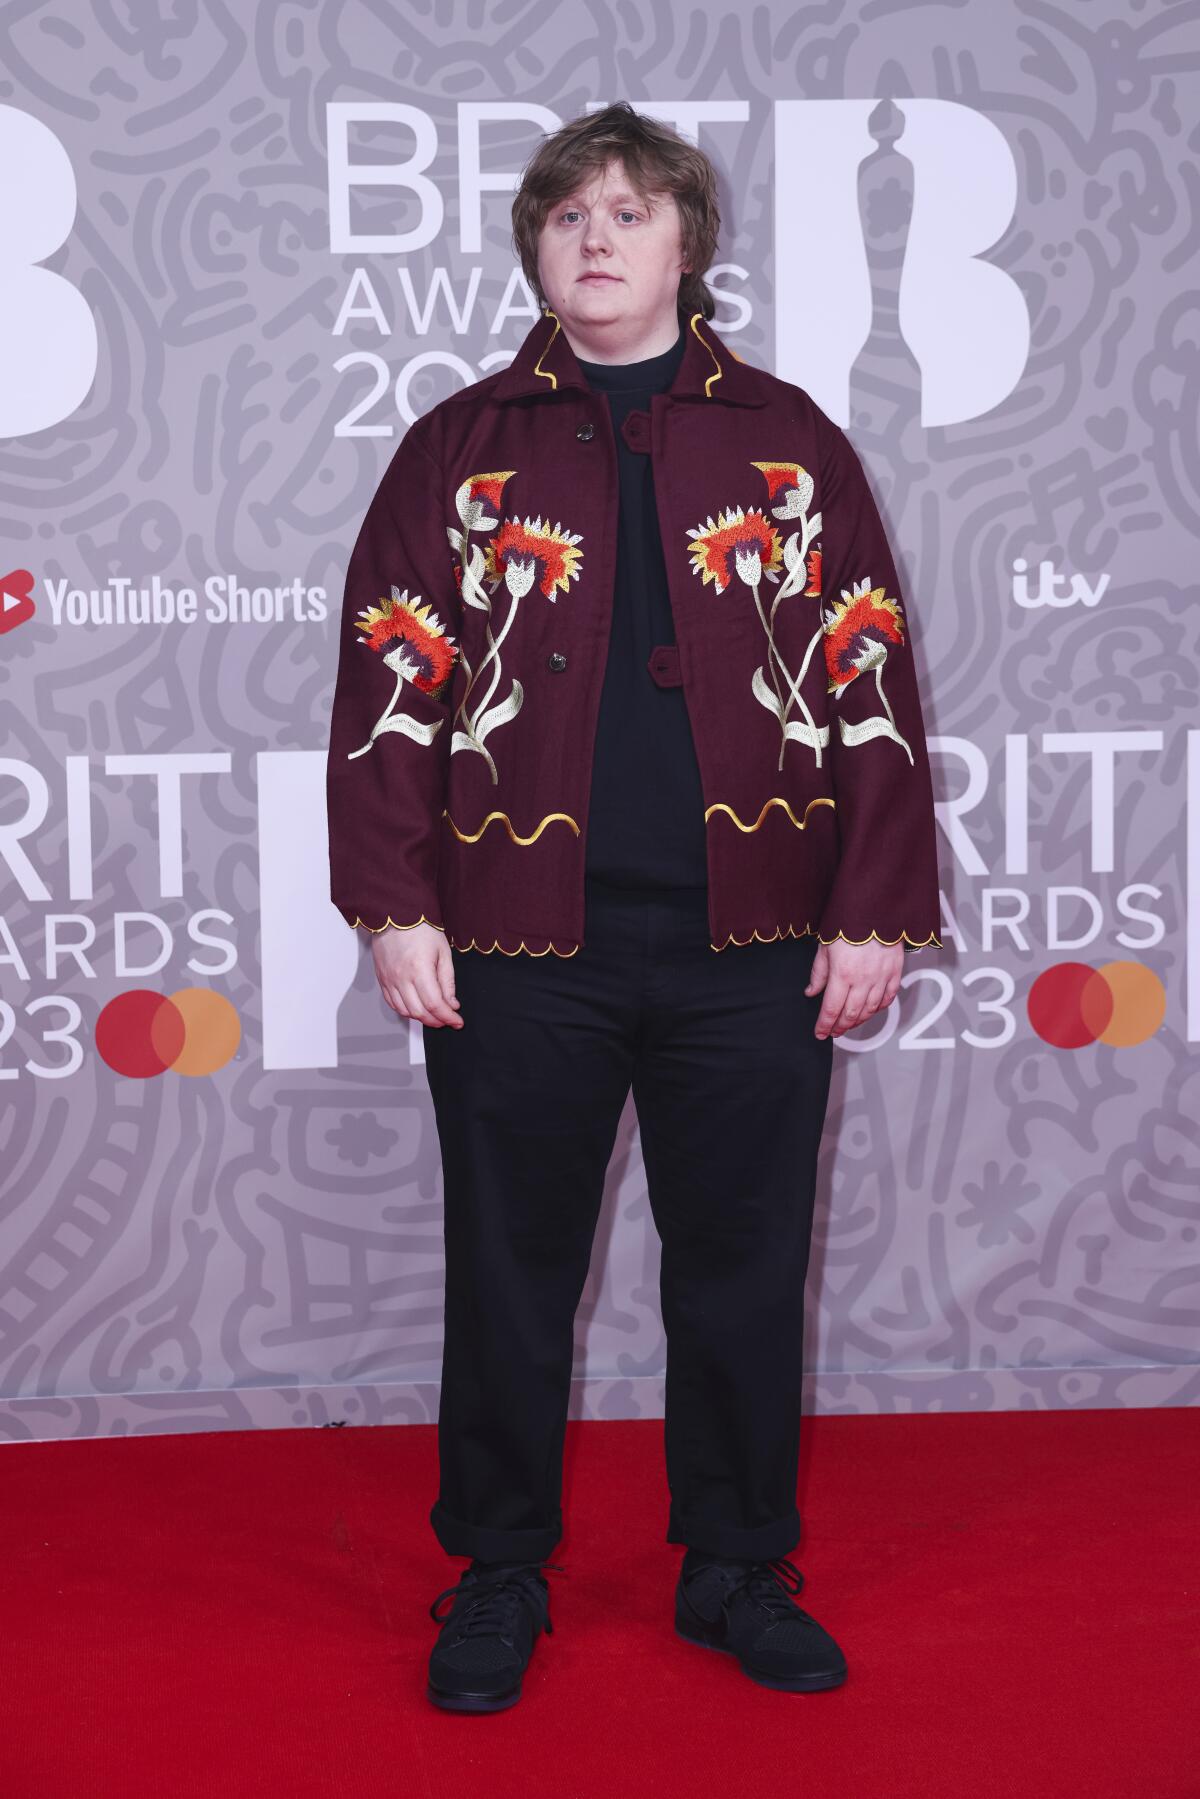 Lewis Capaldi poses for photographers with arms to the side, wearing a maroon coat with flower designs and black pants